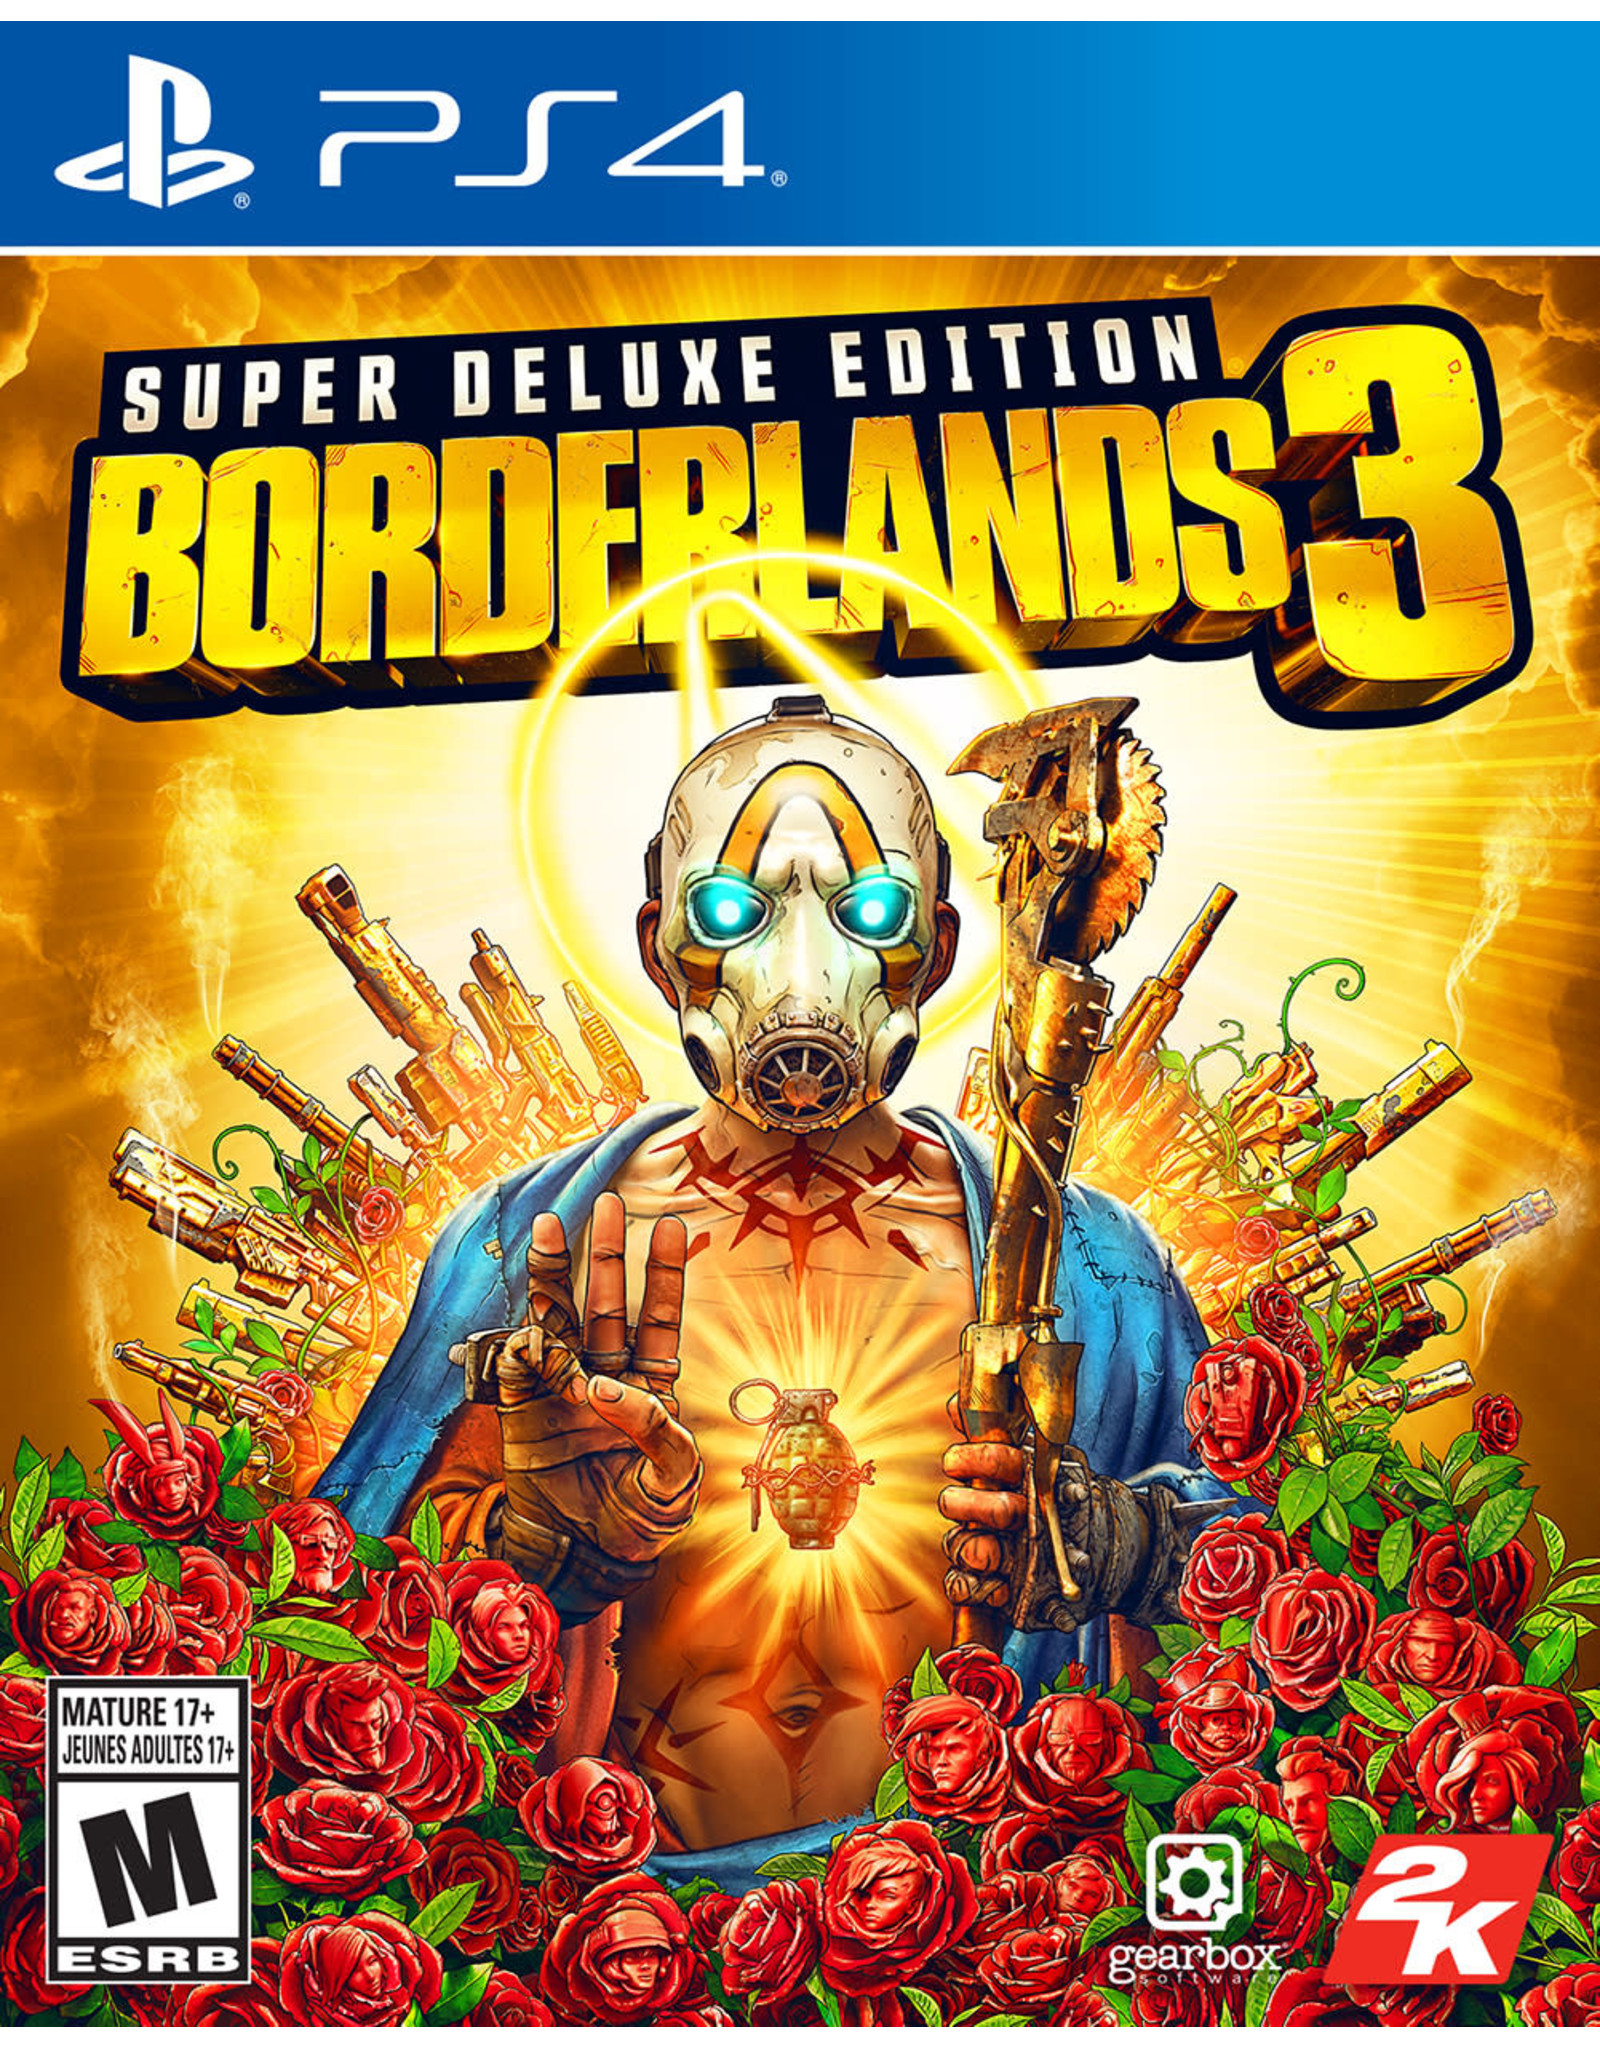 Playstation 4 Borderlands 3 Super Deluxe Edition (Brand New)